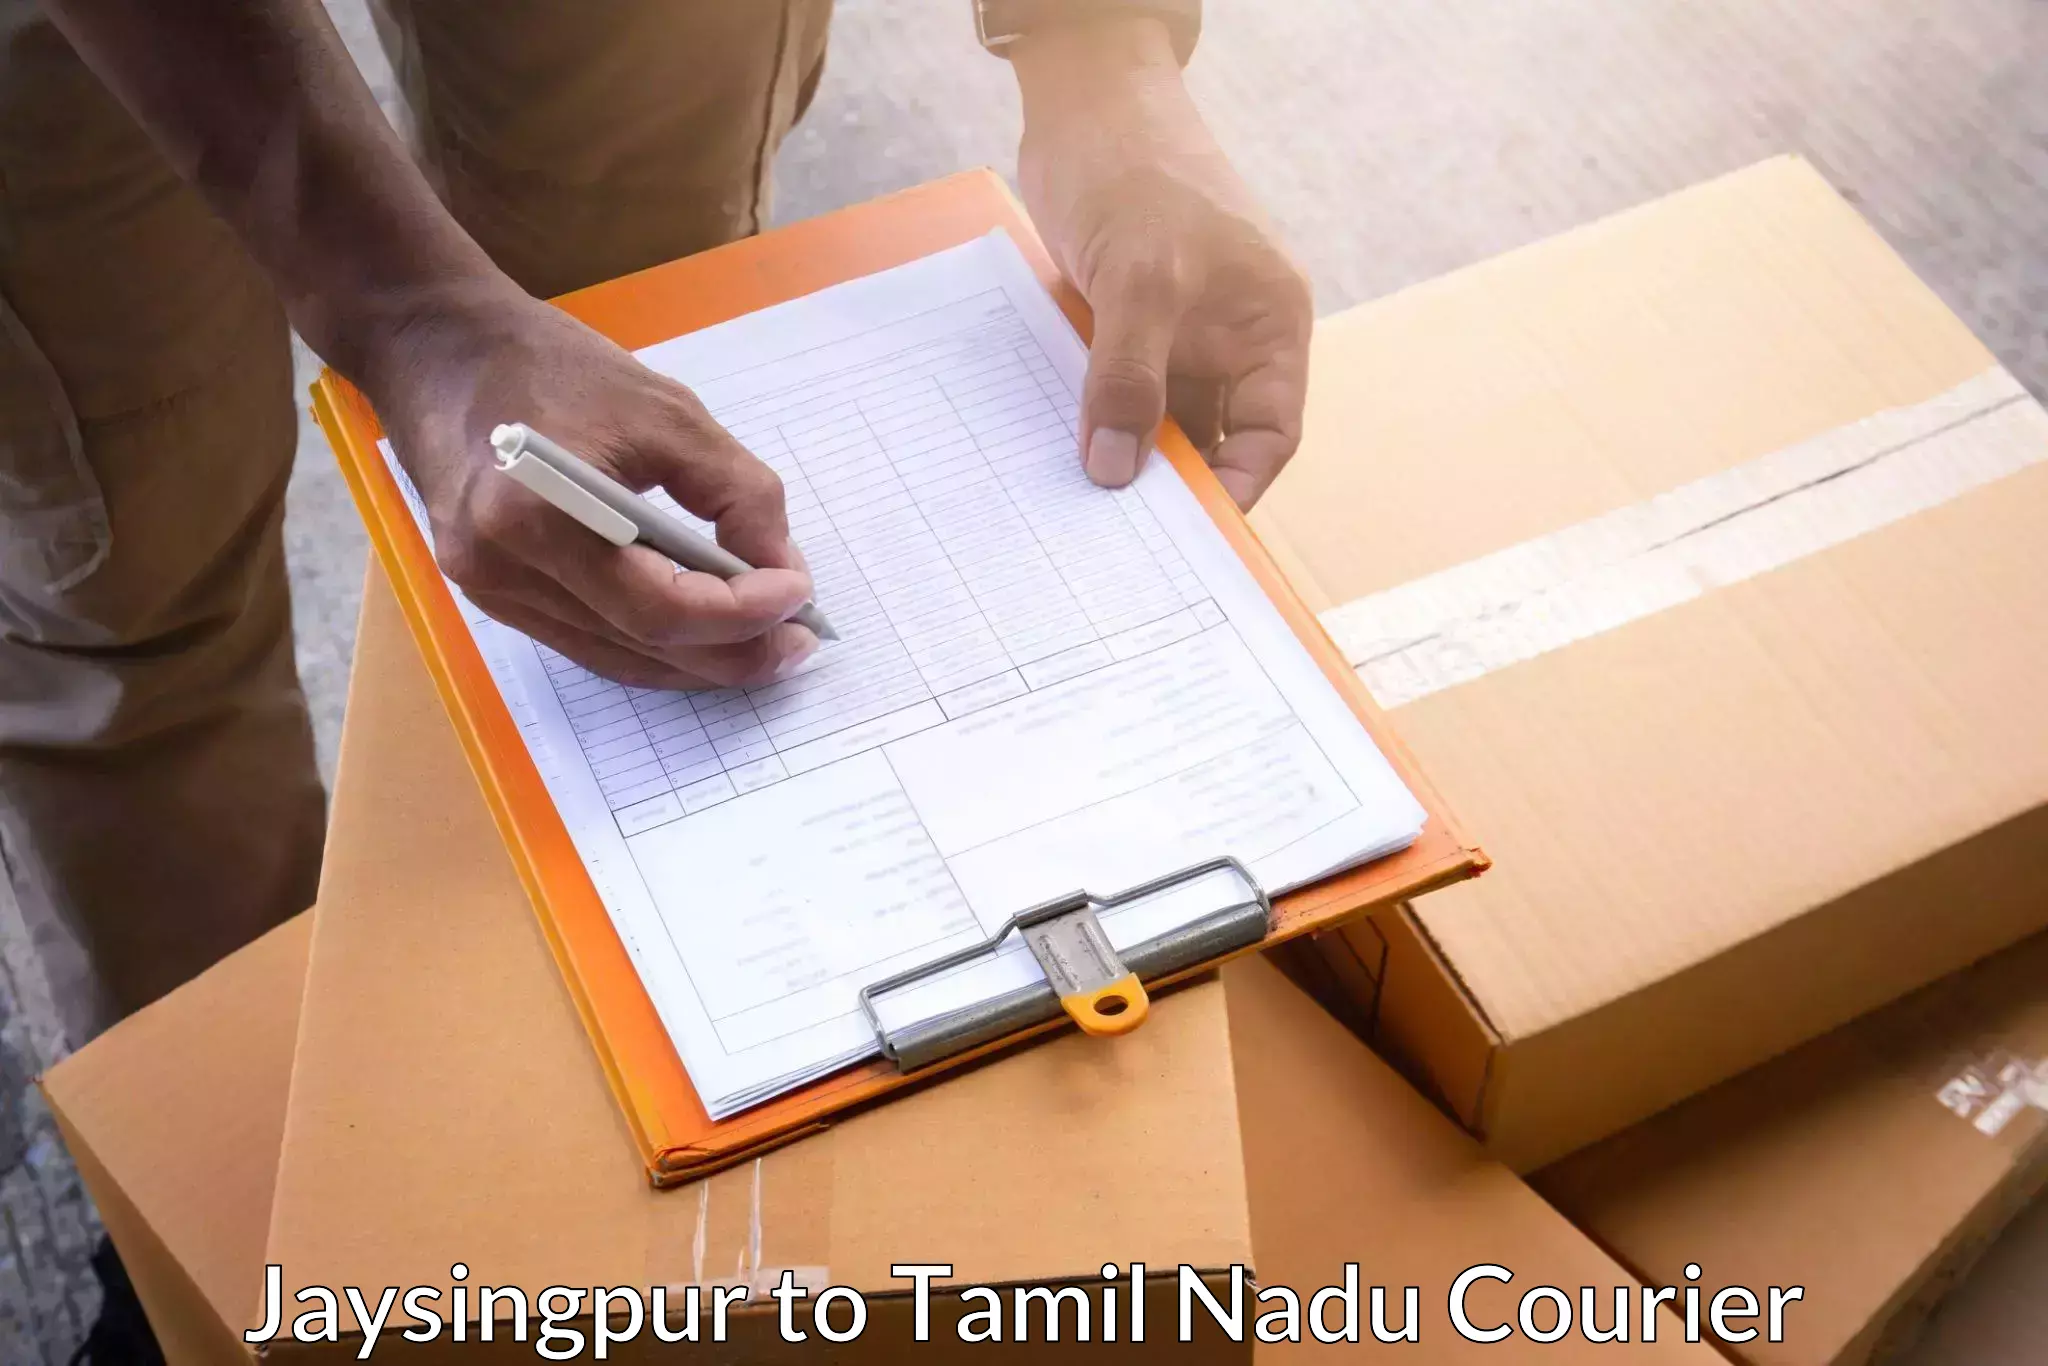 Global courier networks Jaysingpur to Gobichettipalayam